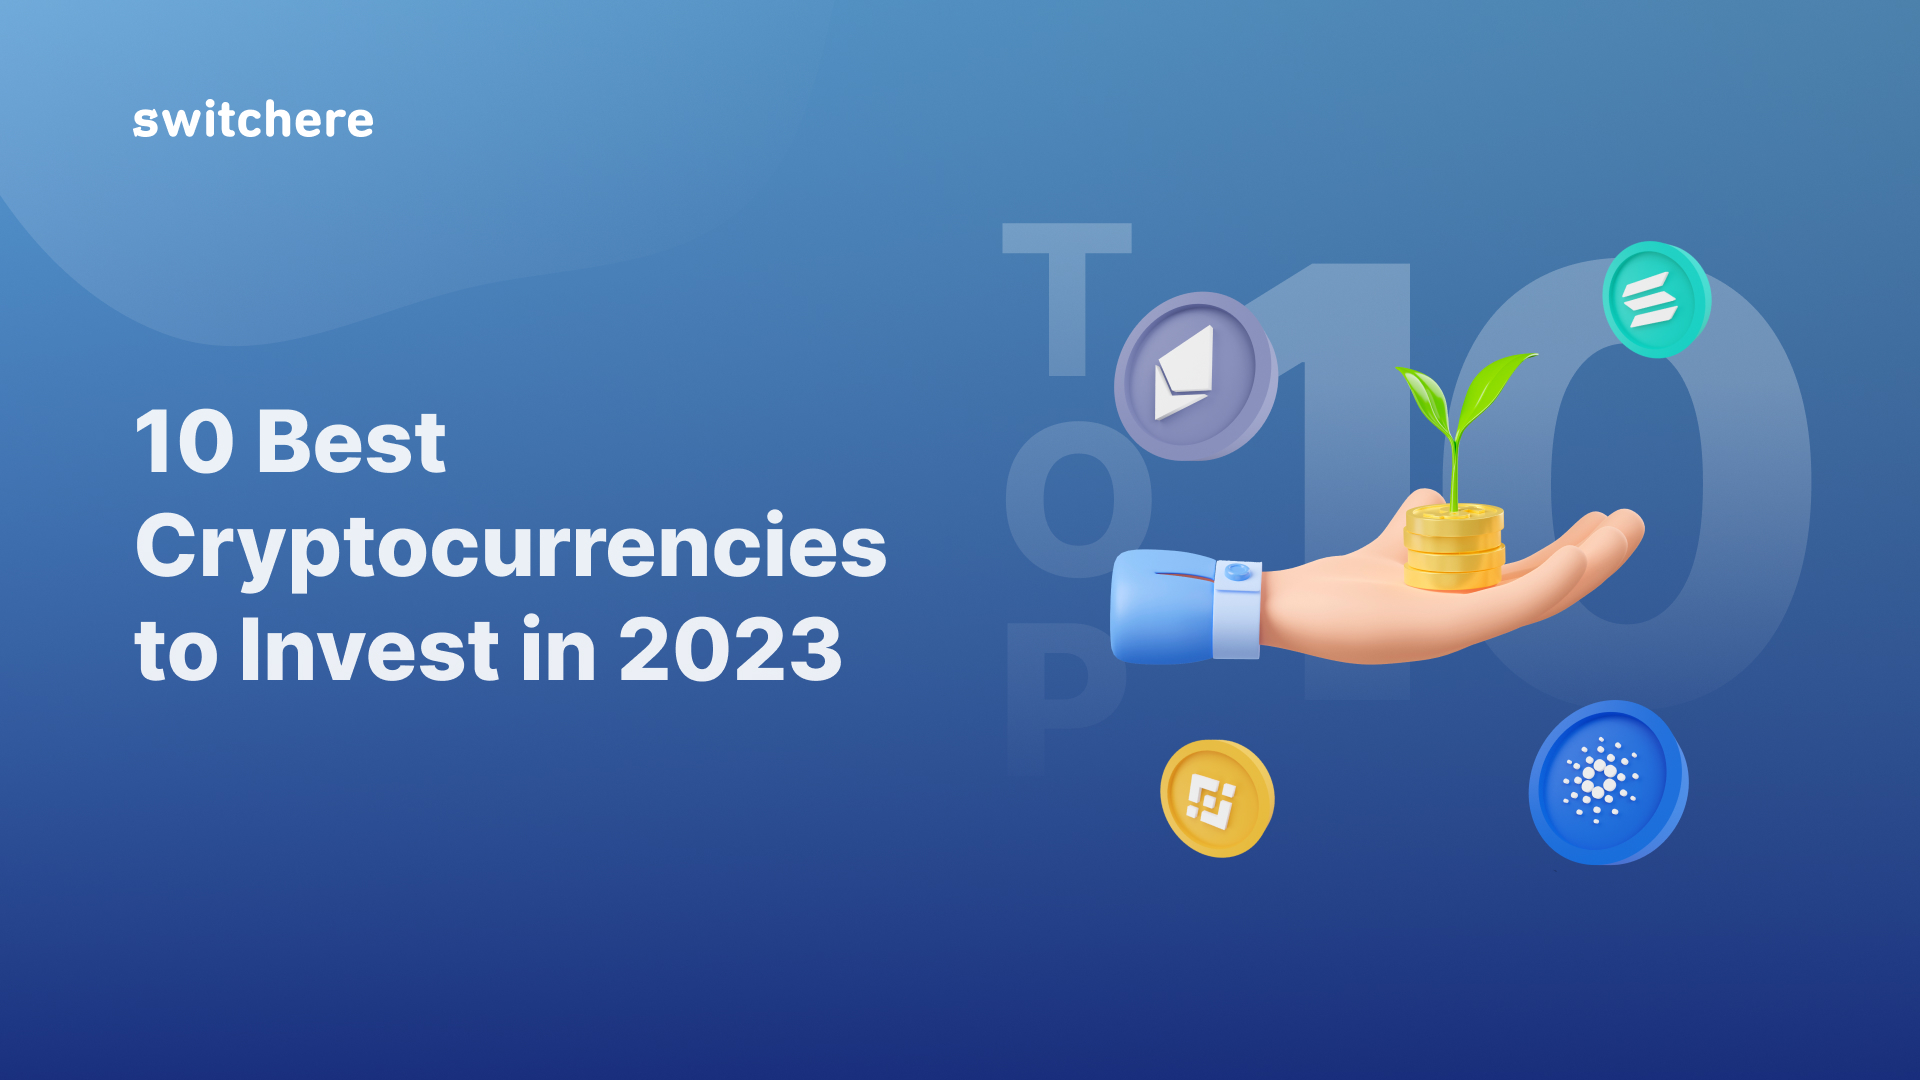 10 Best Cryptocurrencies to Invest in 2023